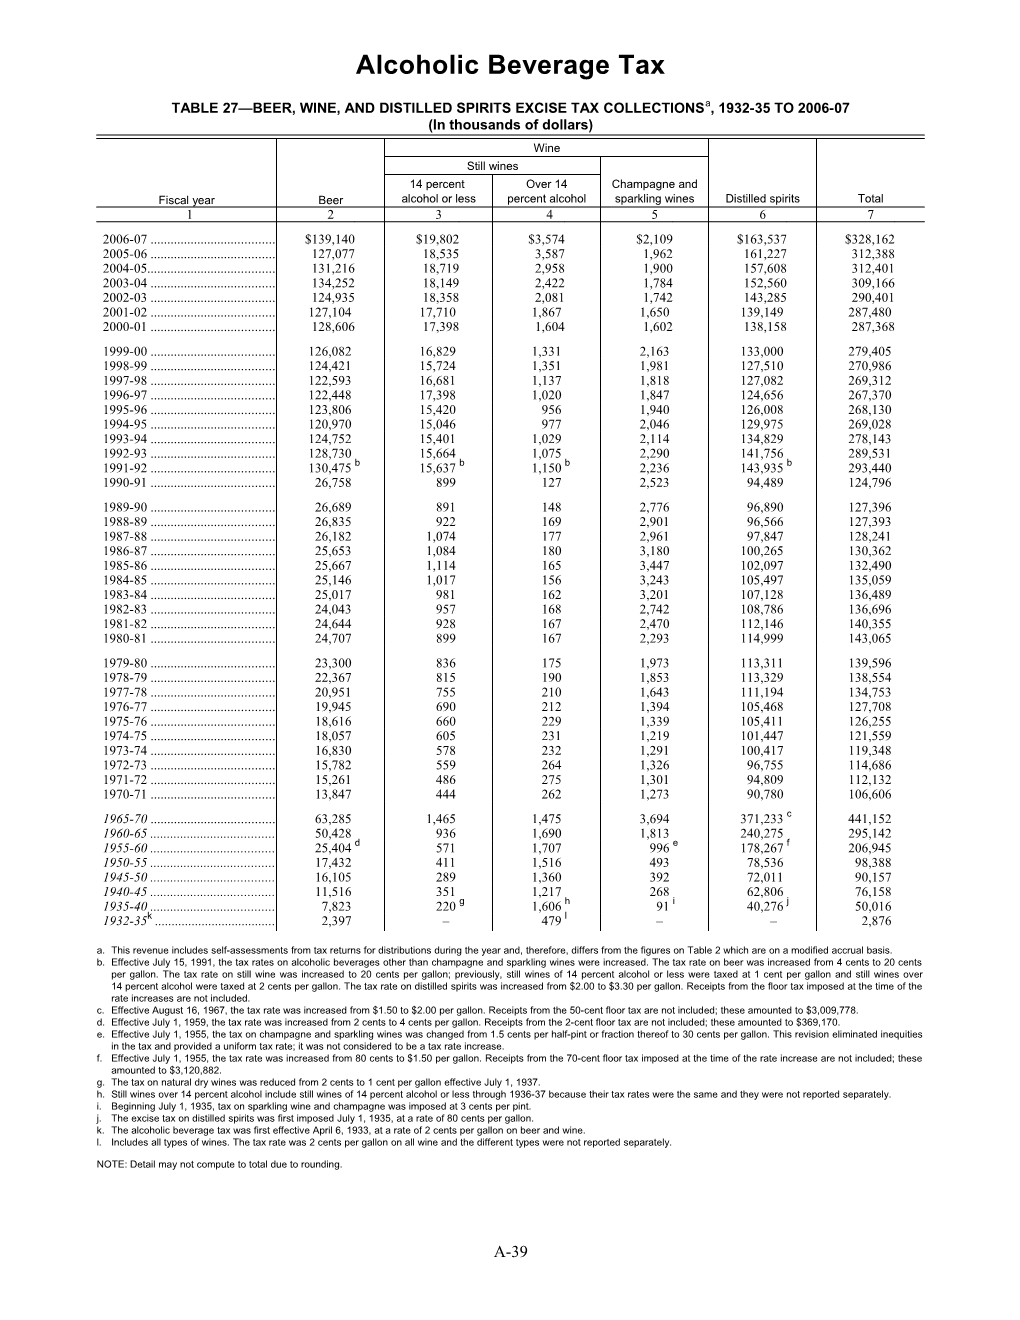 TABLE 27 BEER, WINE, and DISTILLED SPIRITS EXCISE TAX Collectionsa, 1932-35 to 2006-07